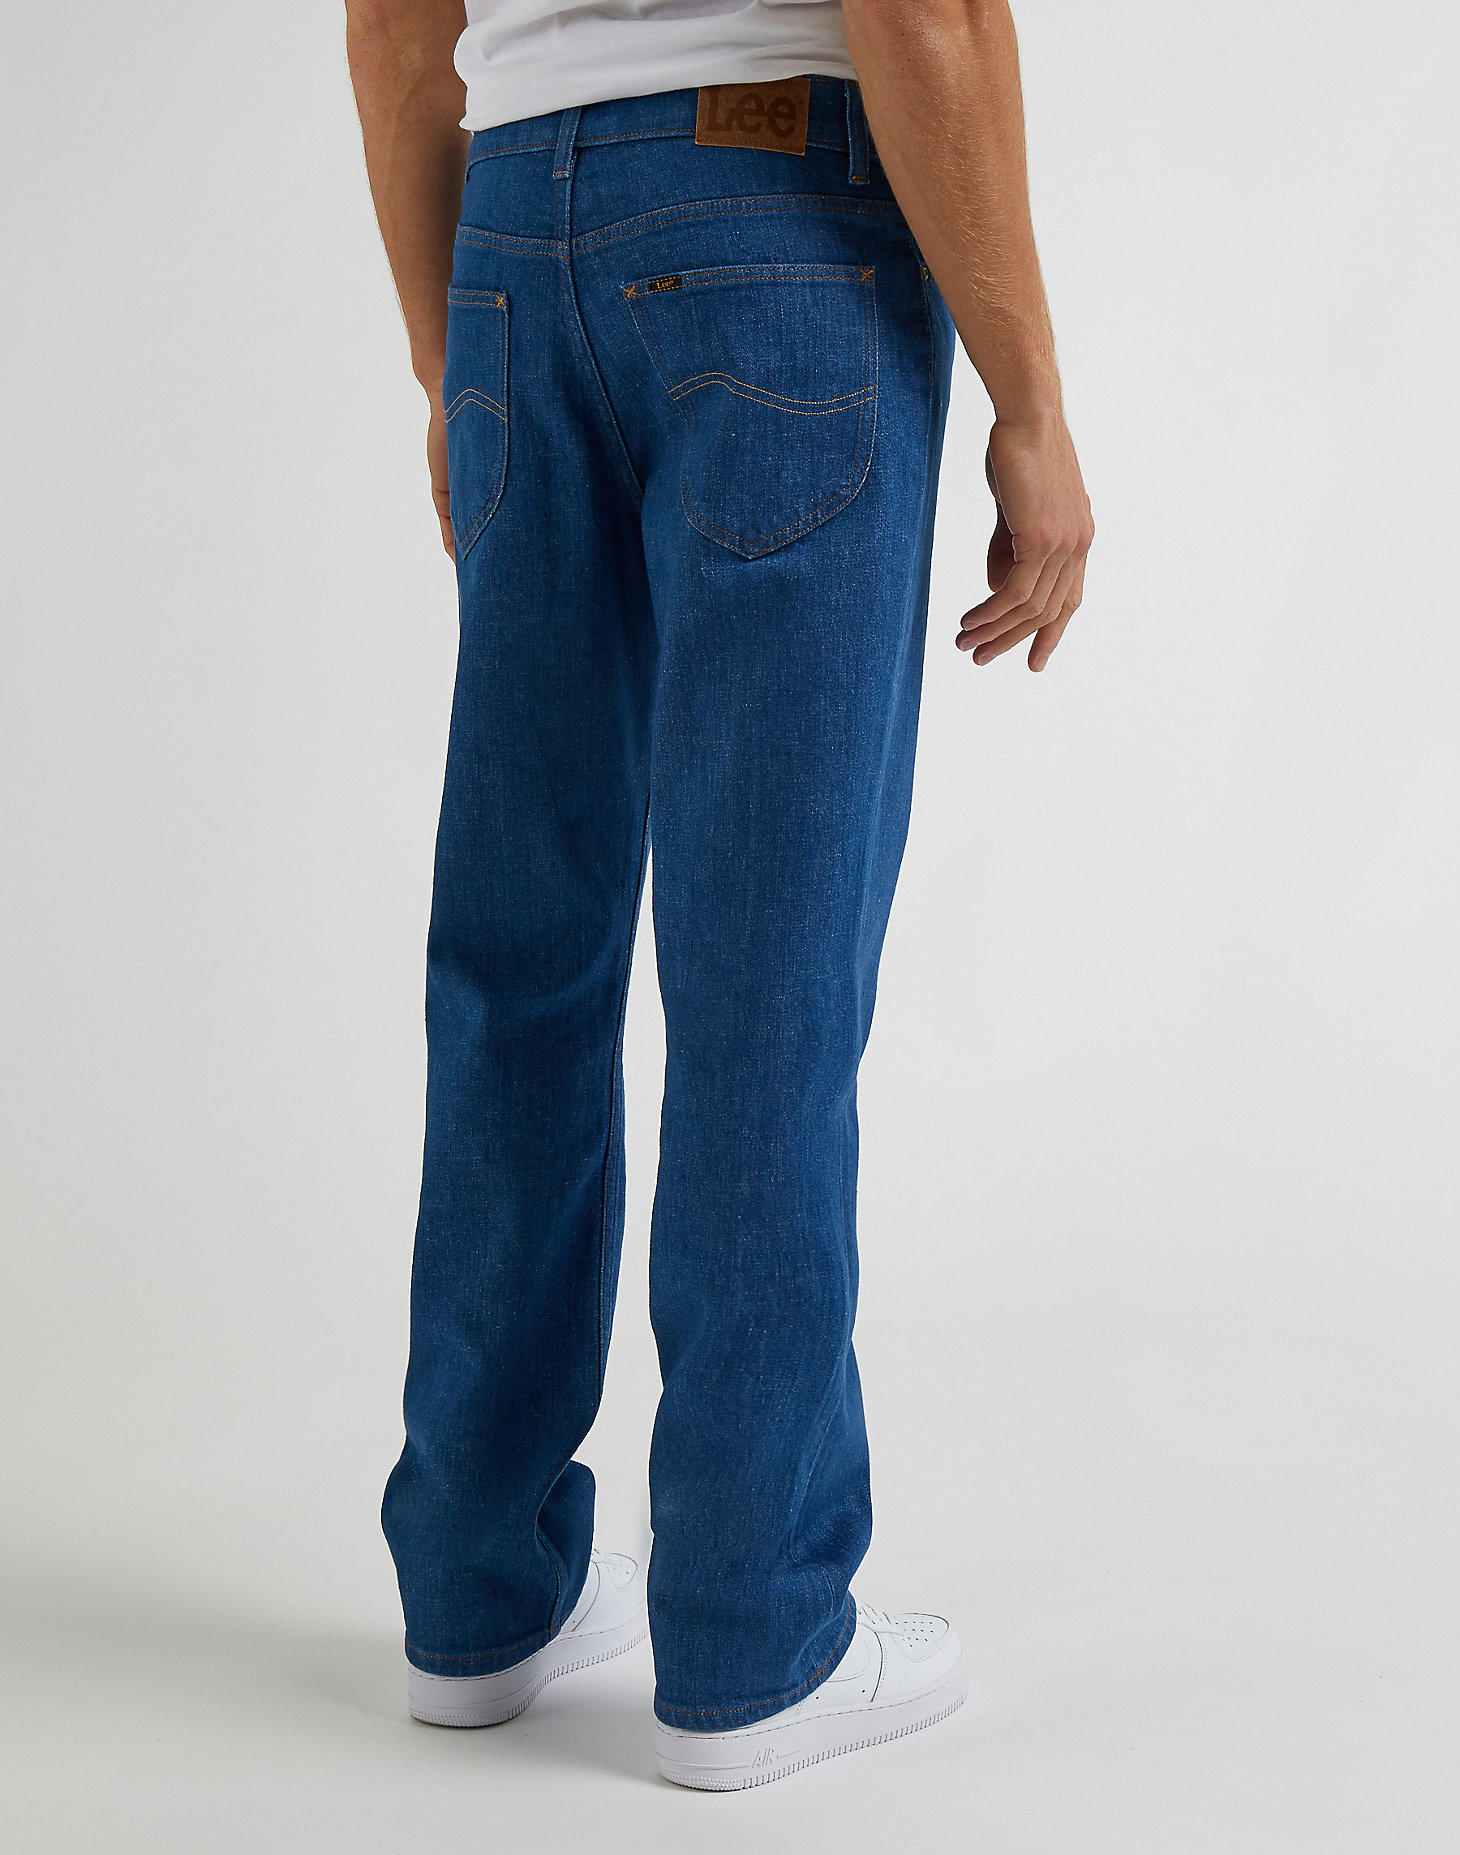 70's Bootcut in Rinse alternative view 1